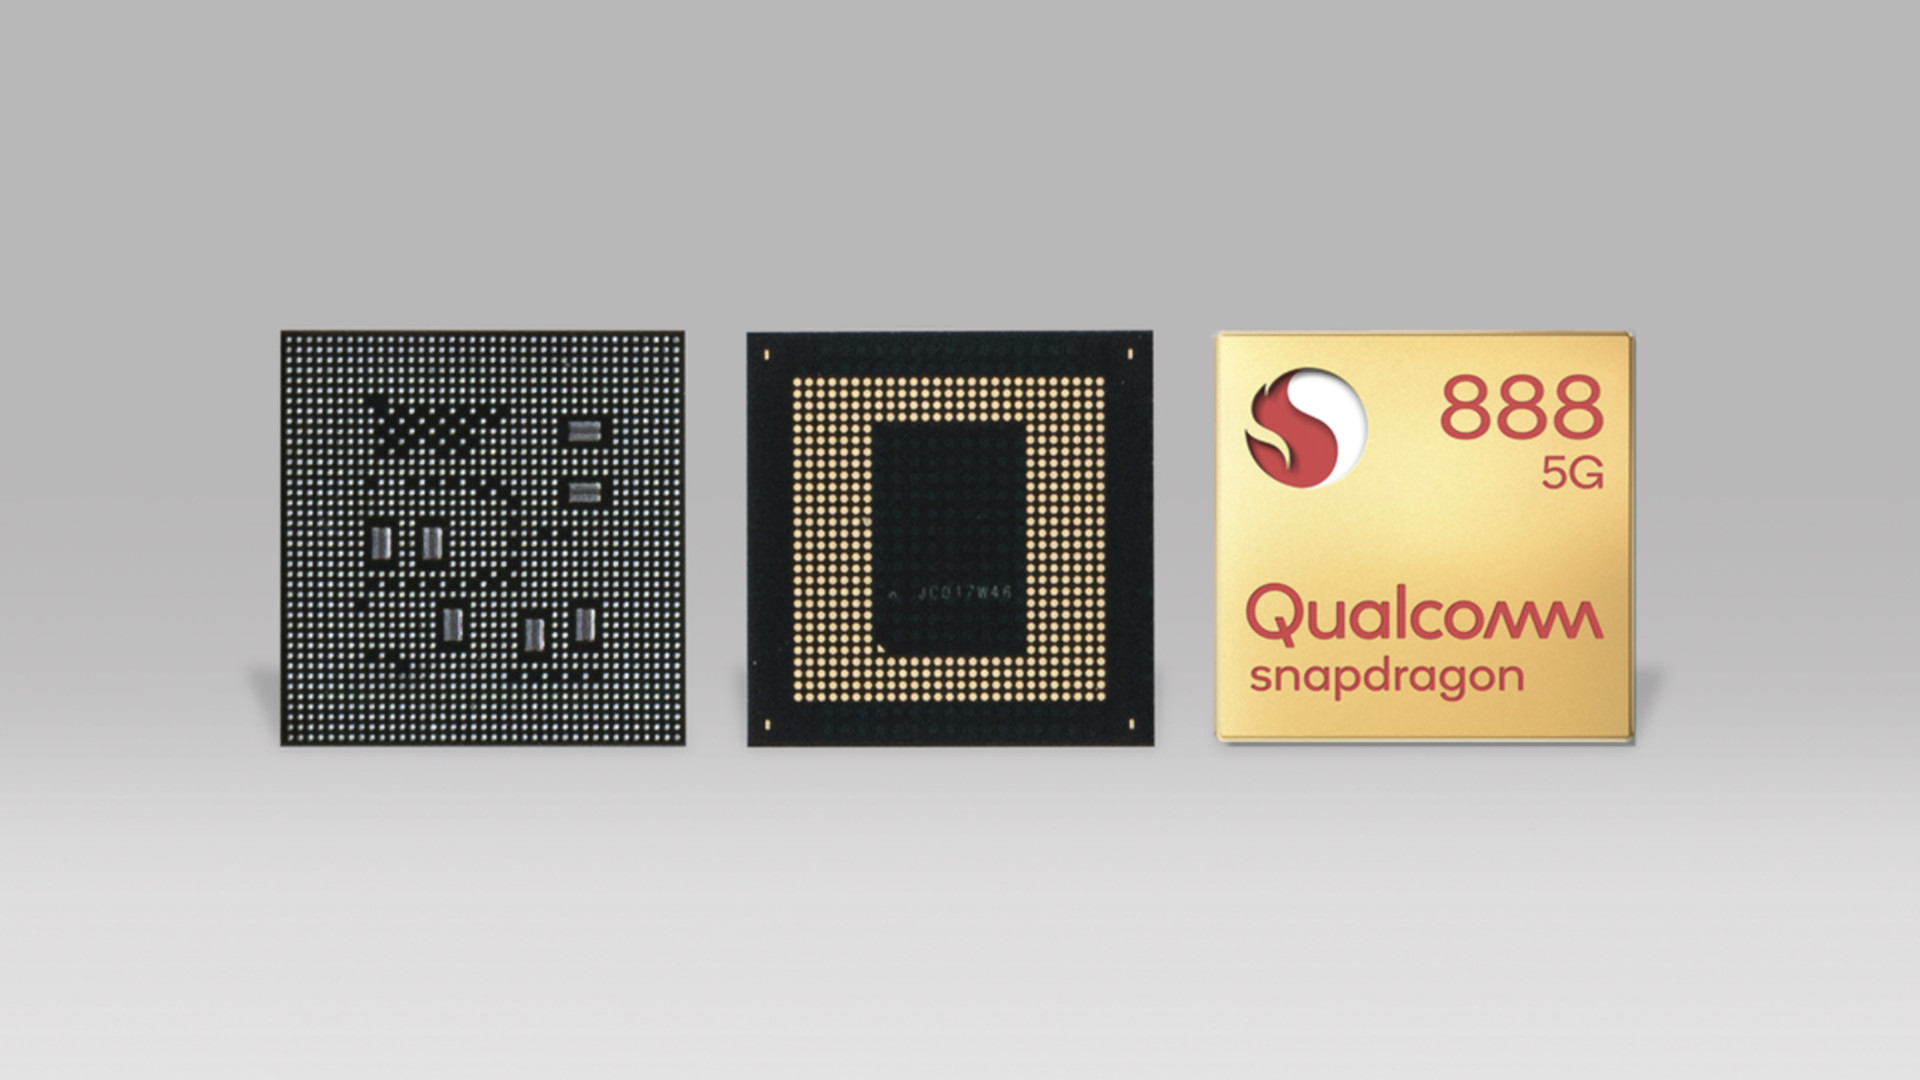 Qualcomm Snapdragon 888 chip front and back